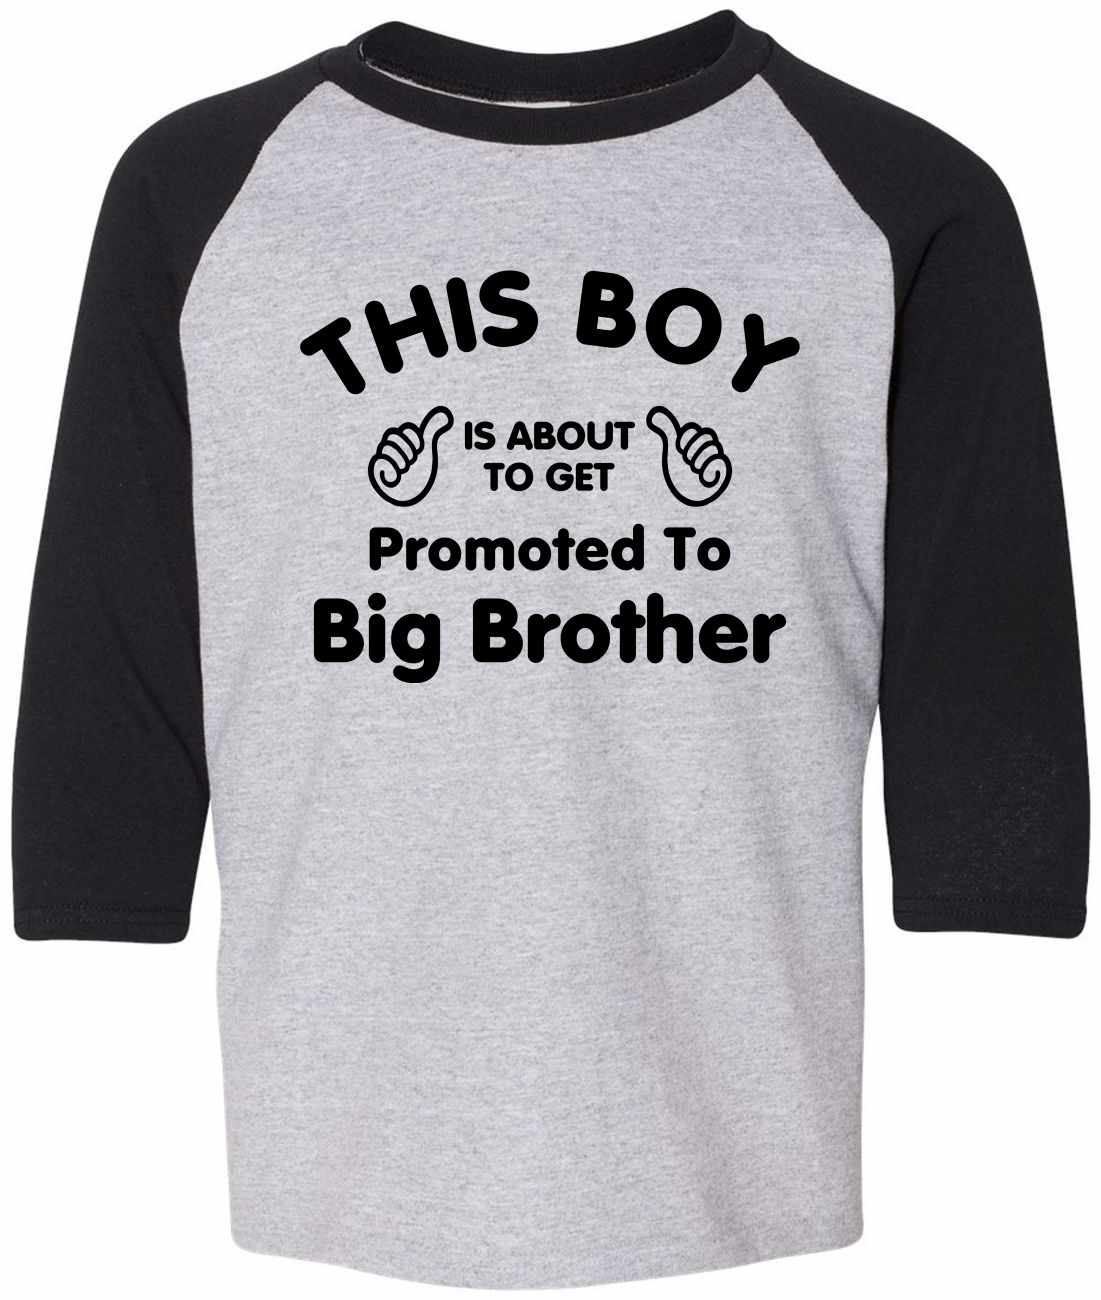 This Boy is About To Get Promoted To Big Brother on Youth Baseball Shirt (#975-212)